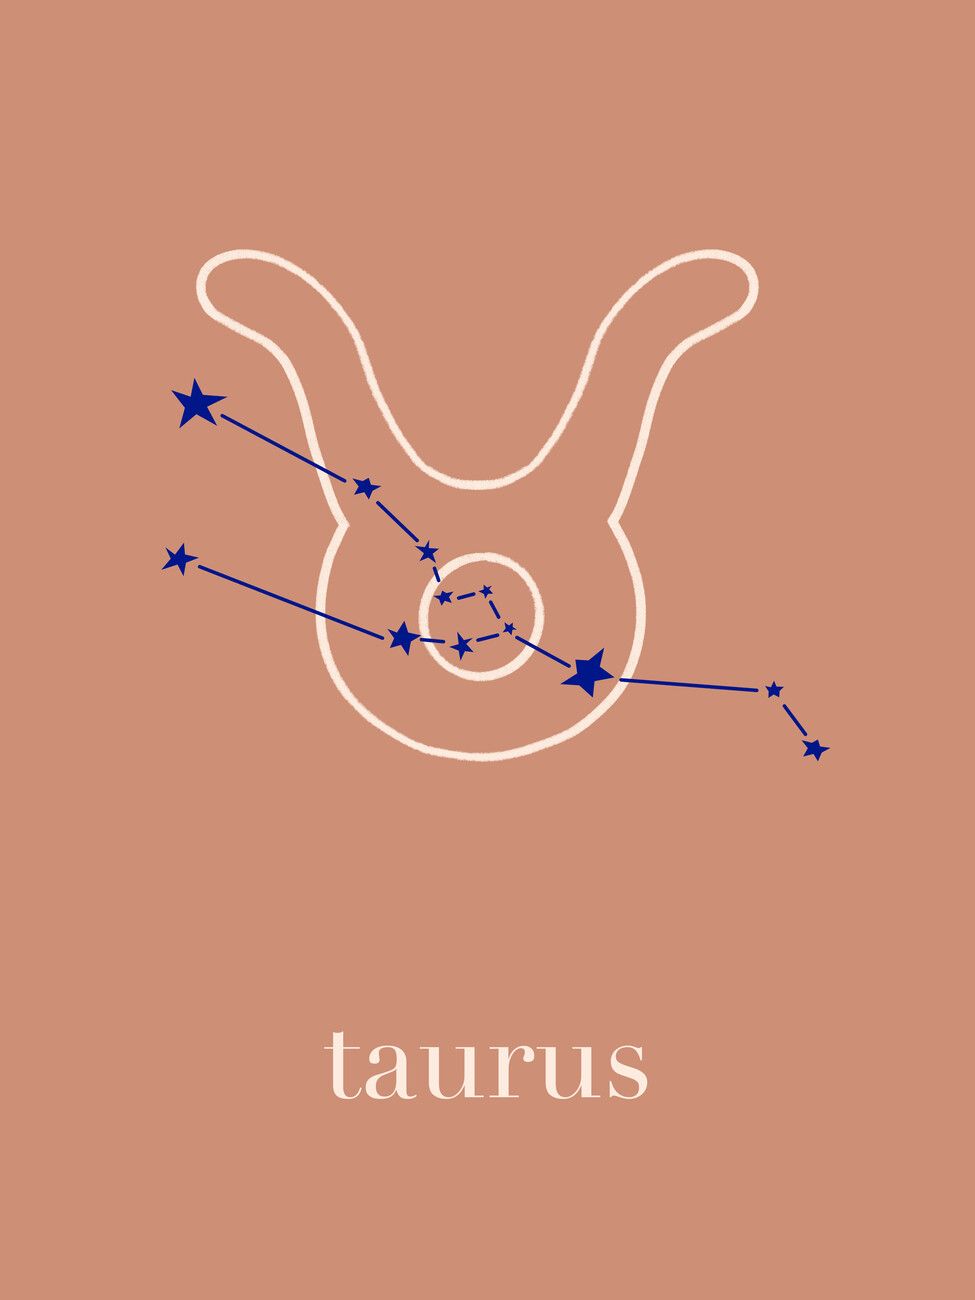 A brown image with a white line drawing of the Taurus zodiac sign. - Terracotta, Taurus